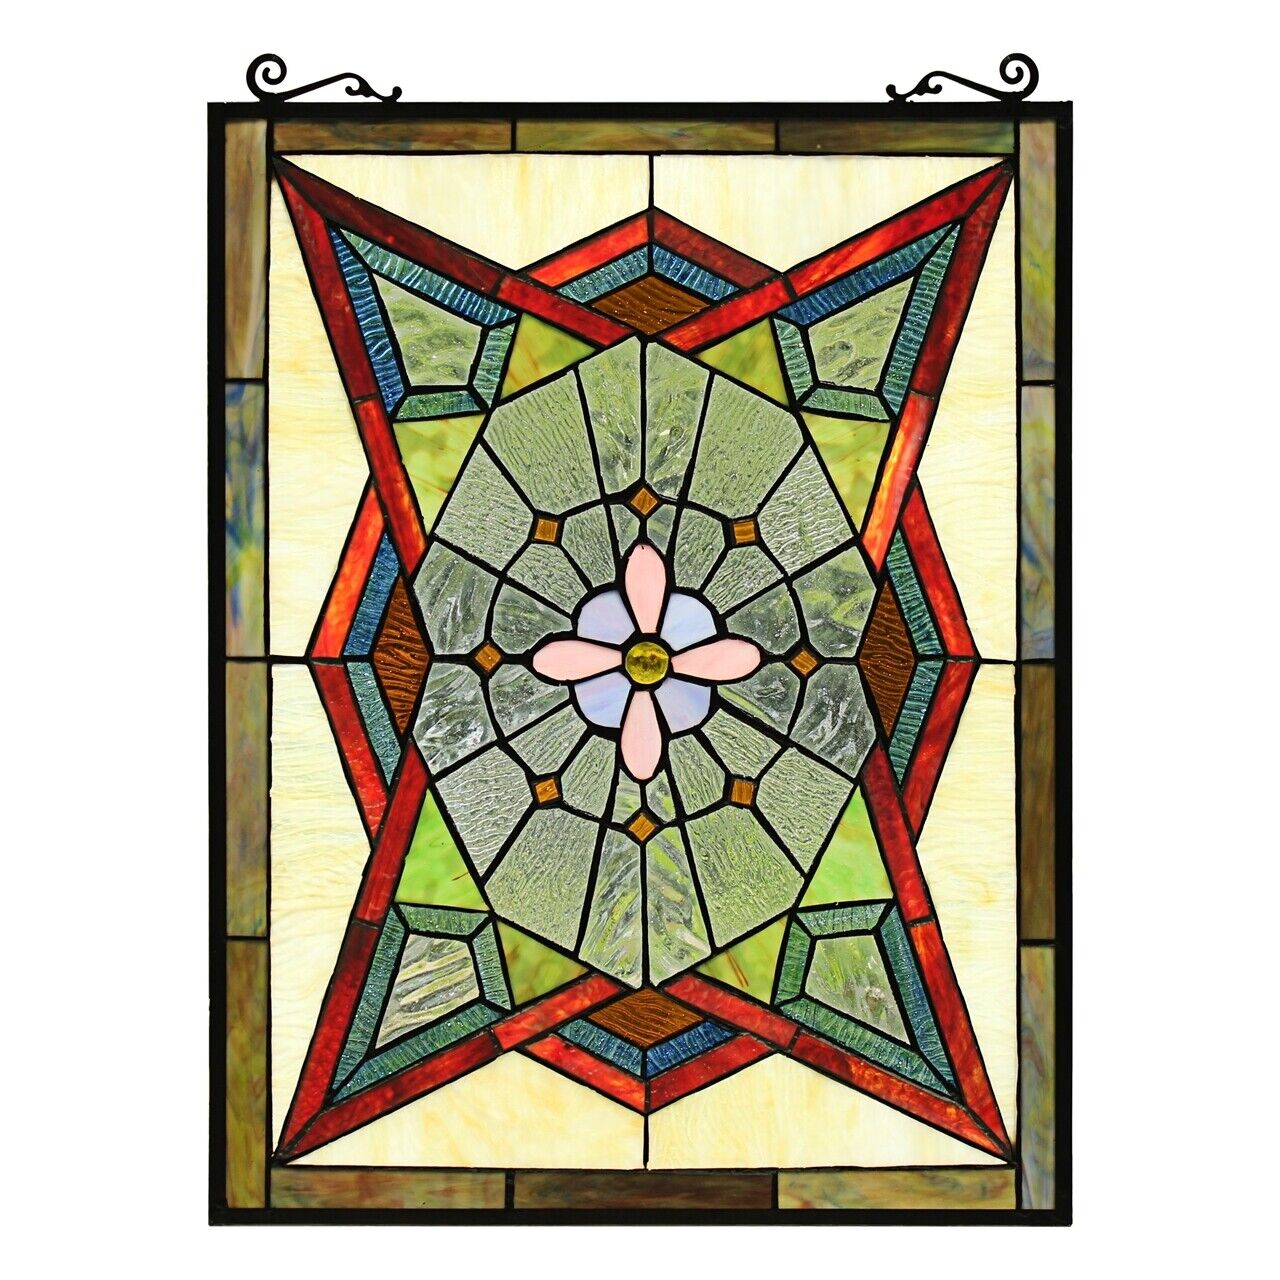 25" Antique Style Stained Glass Window Hanging Panel Suncatcher